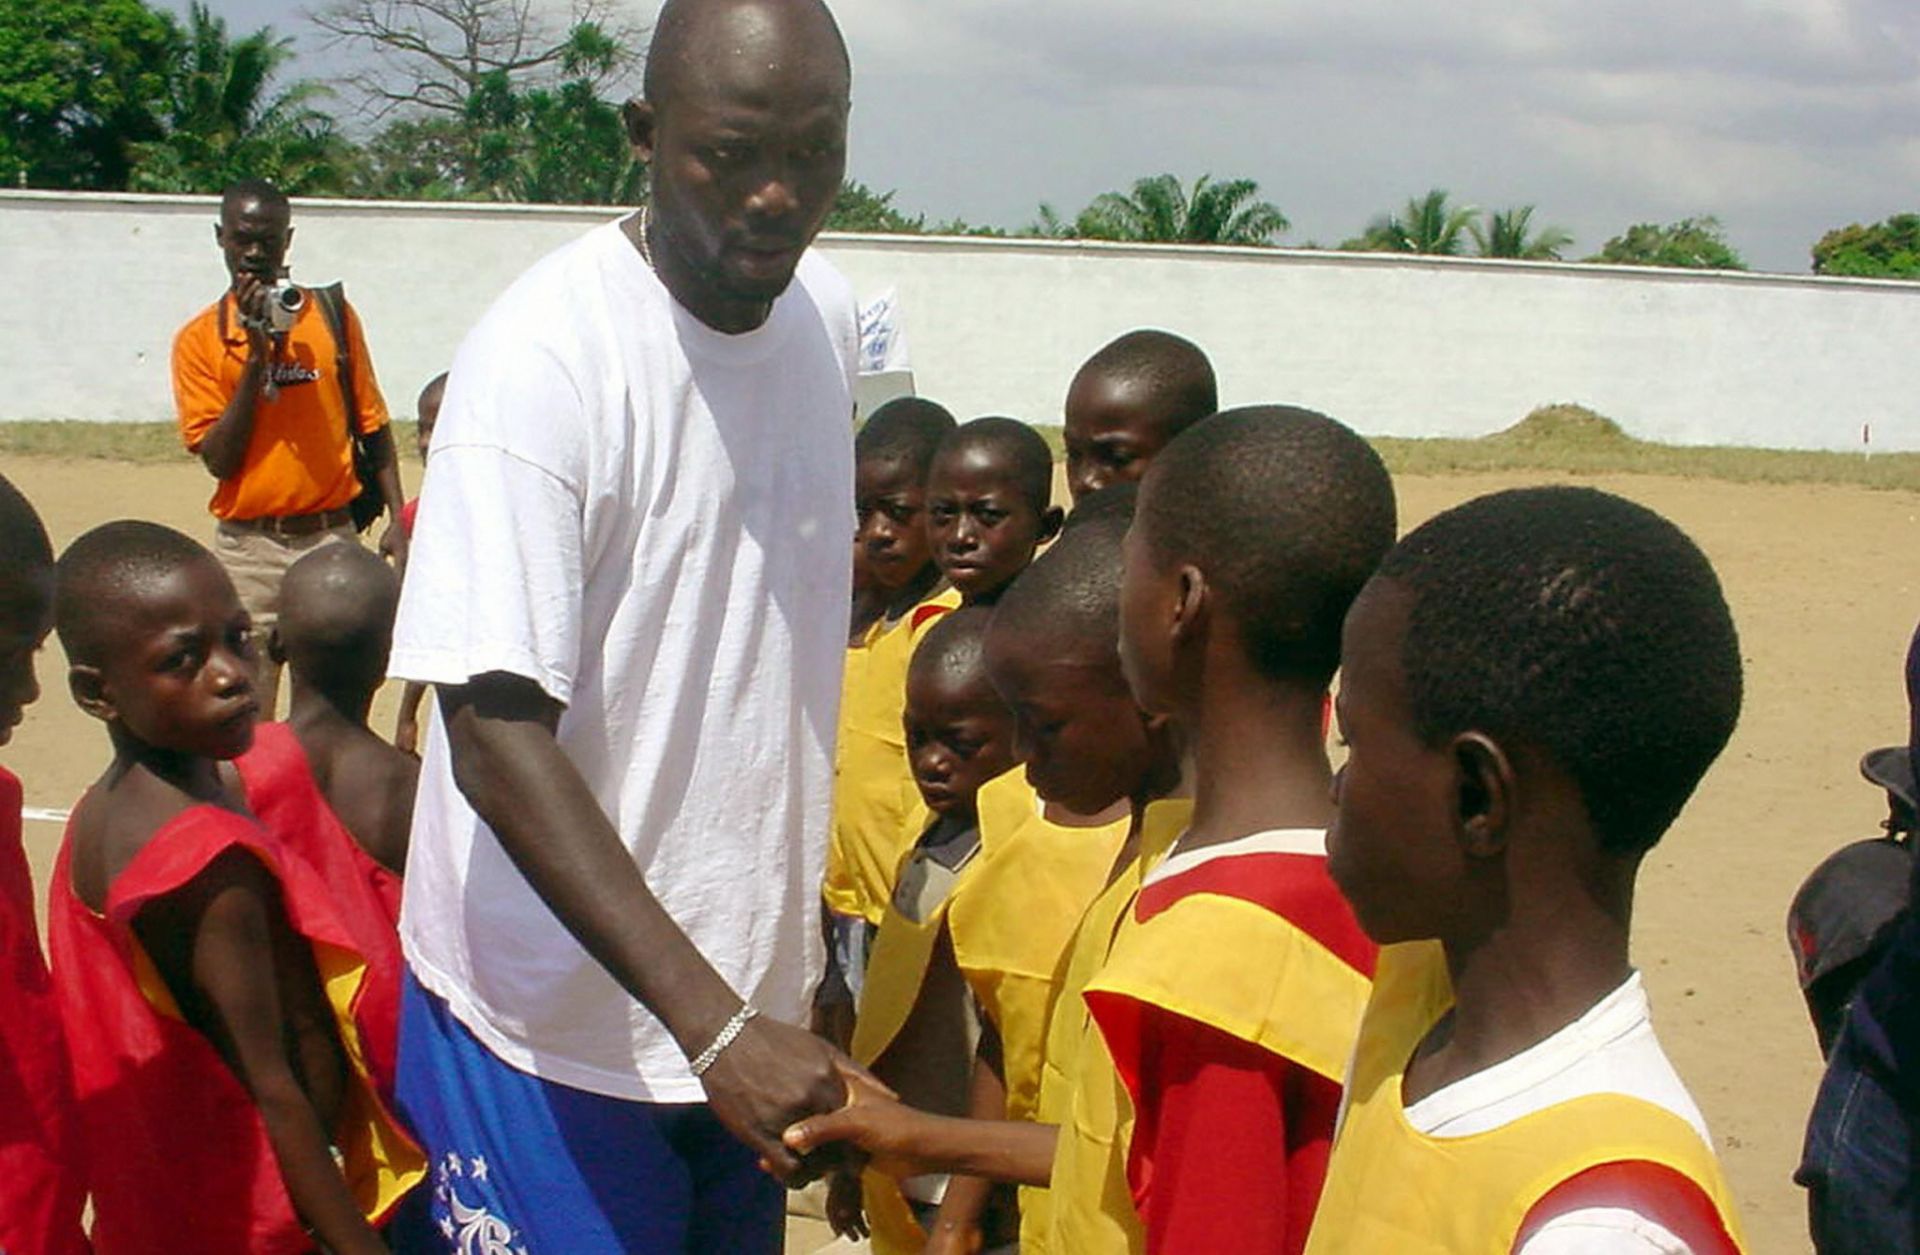 Liberia's star soccer player turned politician George Weah shakes hands with former children soldiers in Monrovia.